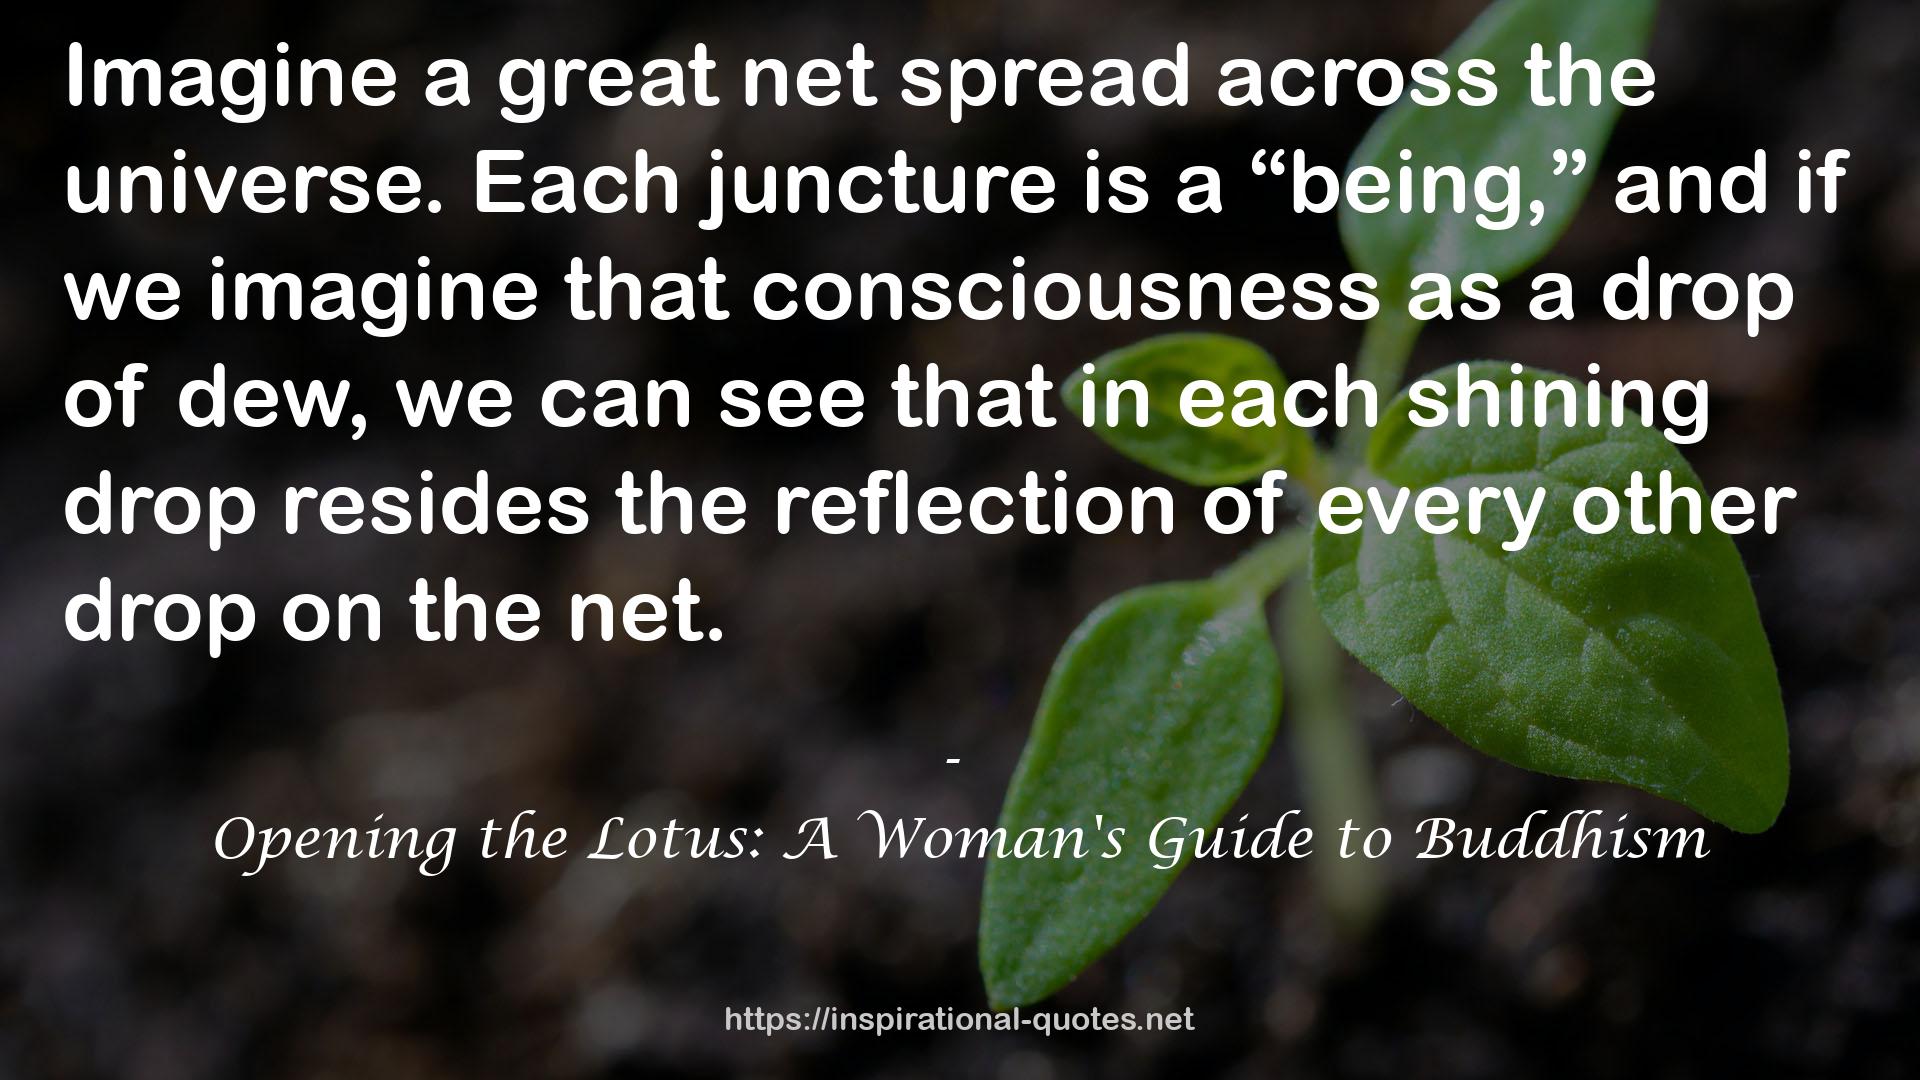 Opening the Lotus: A Woman's Guide to Buddhism QUOTES